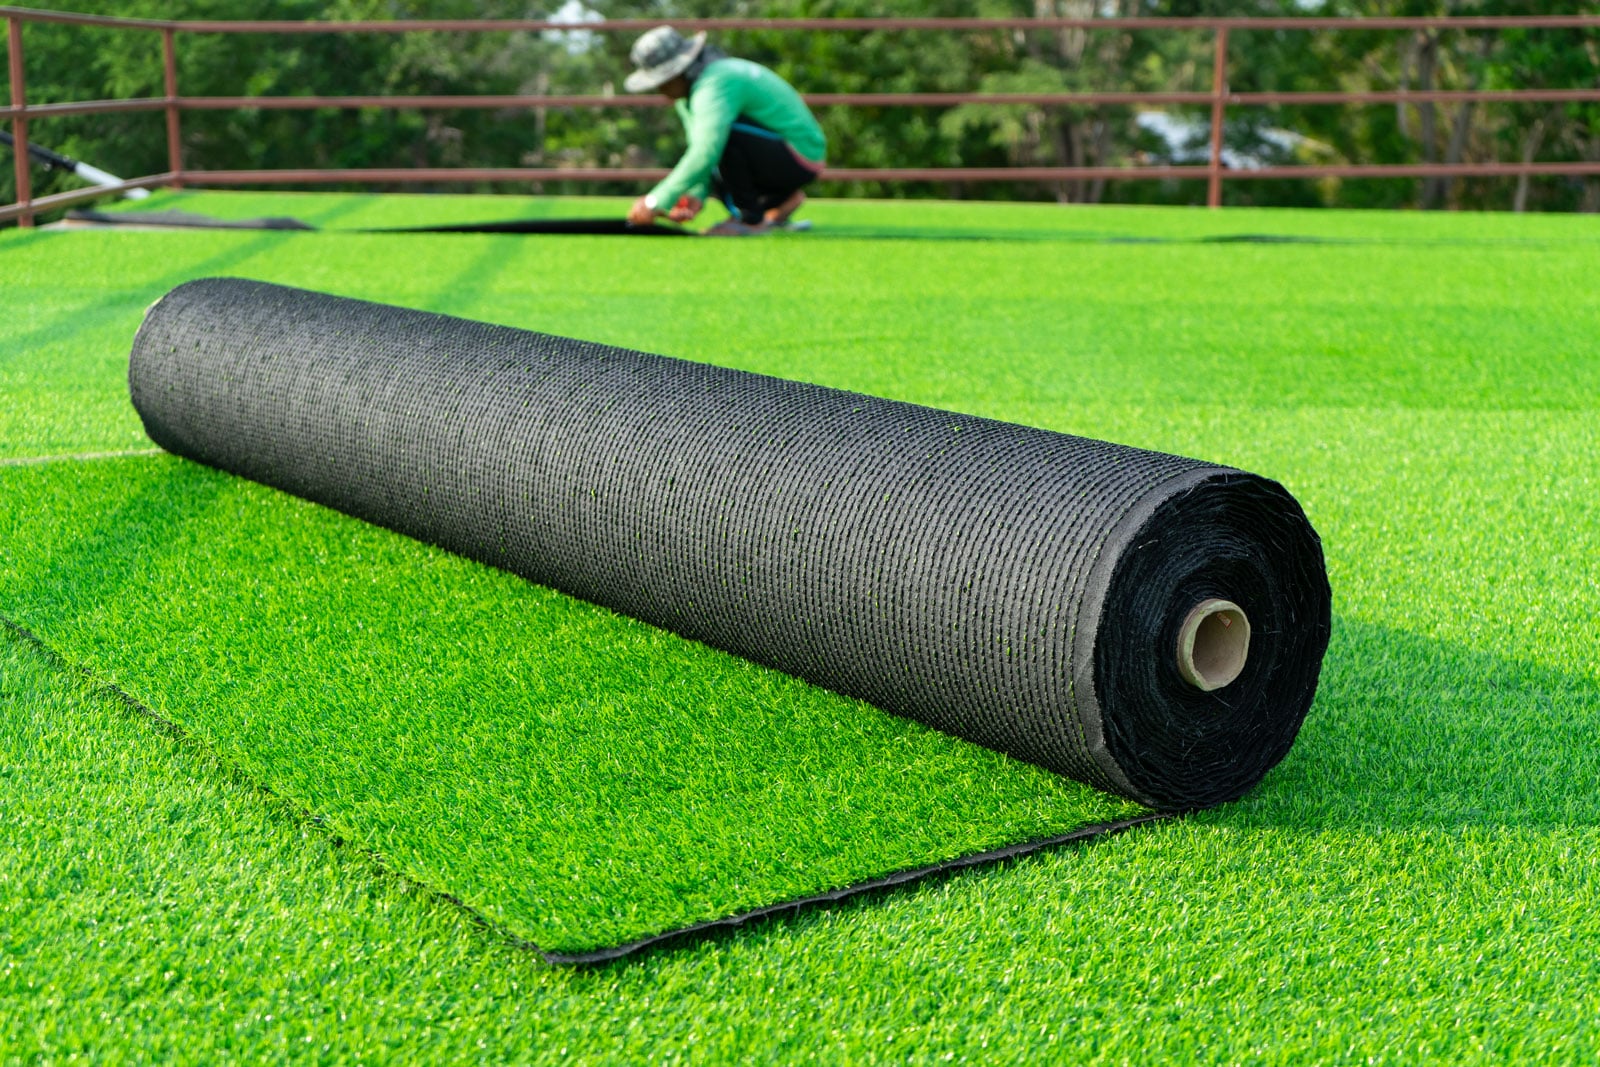 Back Nine Greens Partners with LawnPop to Bring Luxury Putting Greens and Artificial Grass to Austin, TX